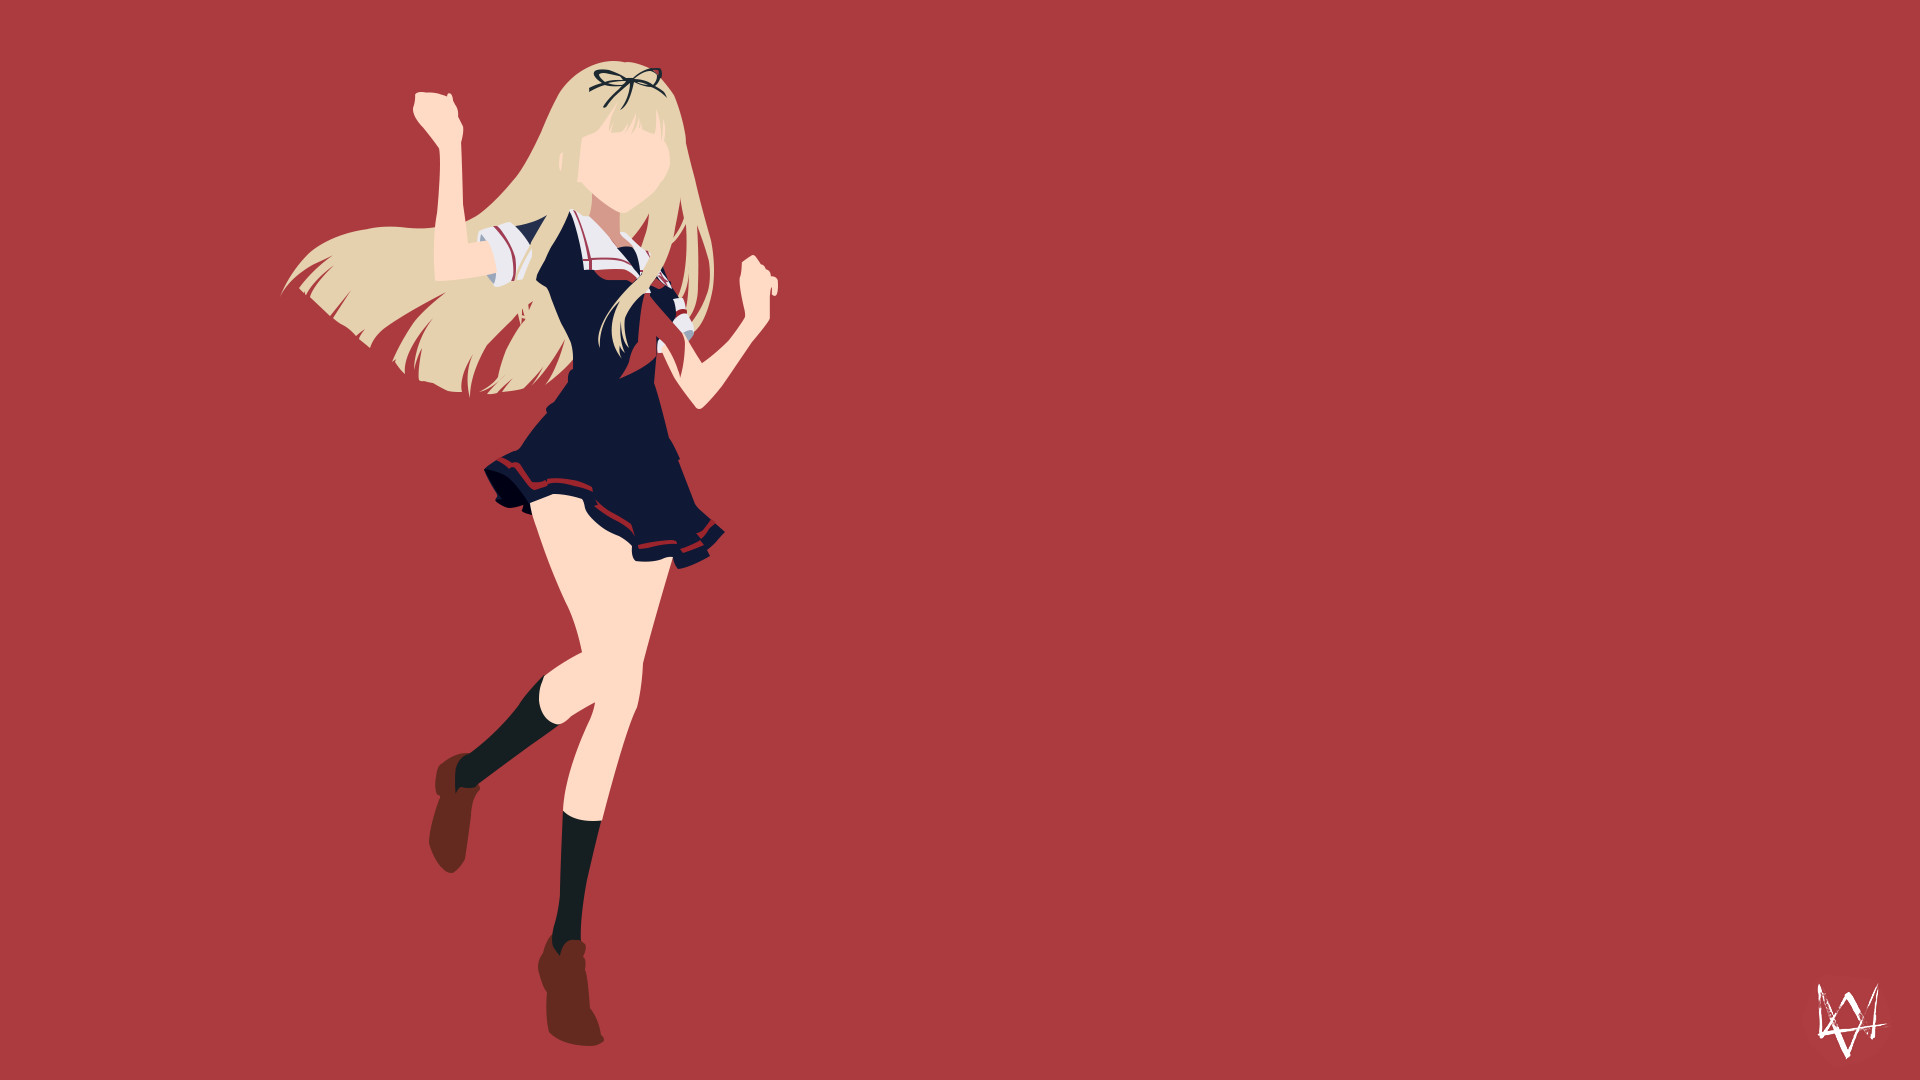 … Yuudachi (Kantai Collection) Minimalist Anime WP by Lucifer012